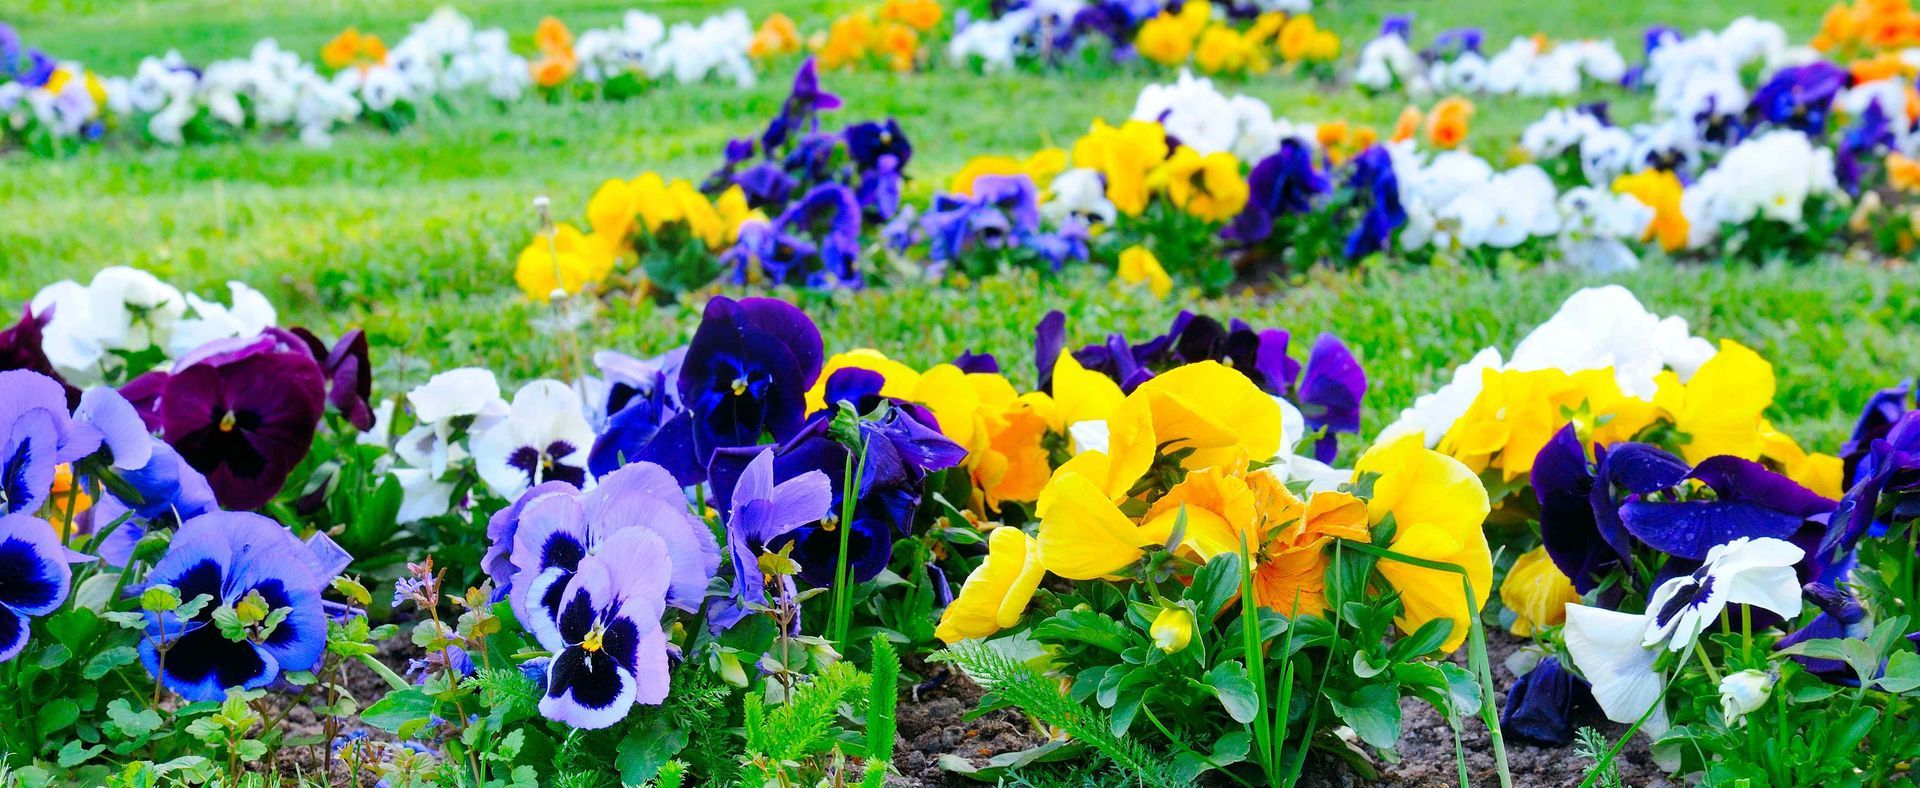 Flower garden beds with many different colors.